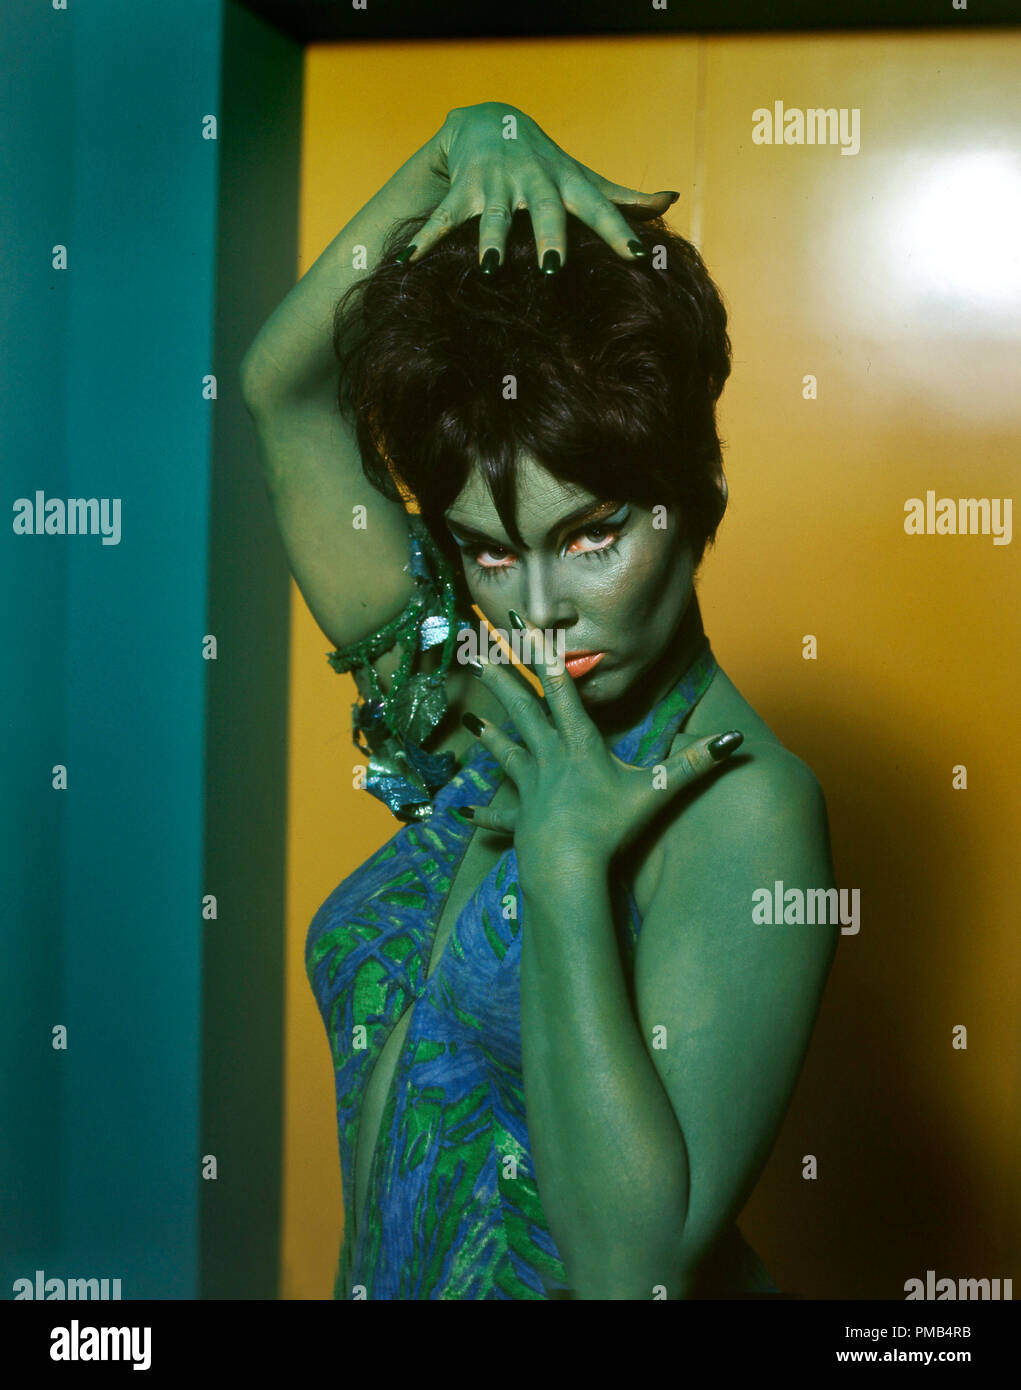 Yvonne Craig as Marta the green slave girl in the episode 'Whom Gods Destroy', 'Star Trek' (1969) Paramount    File Reference # 33371 352THA Stock Photo